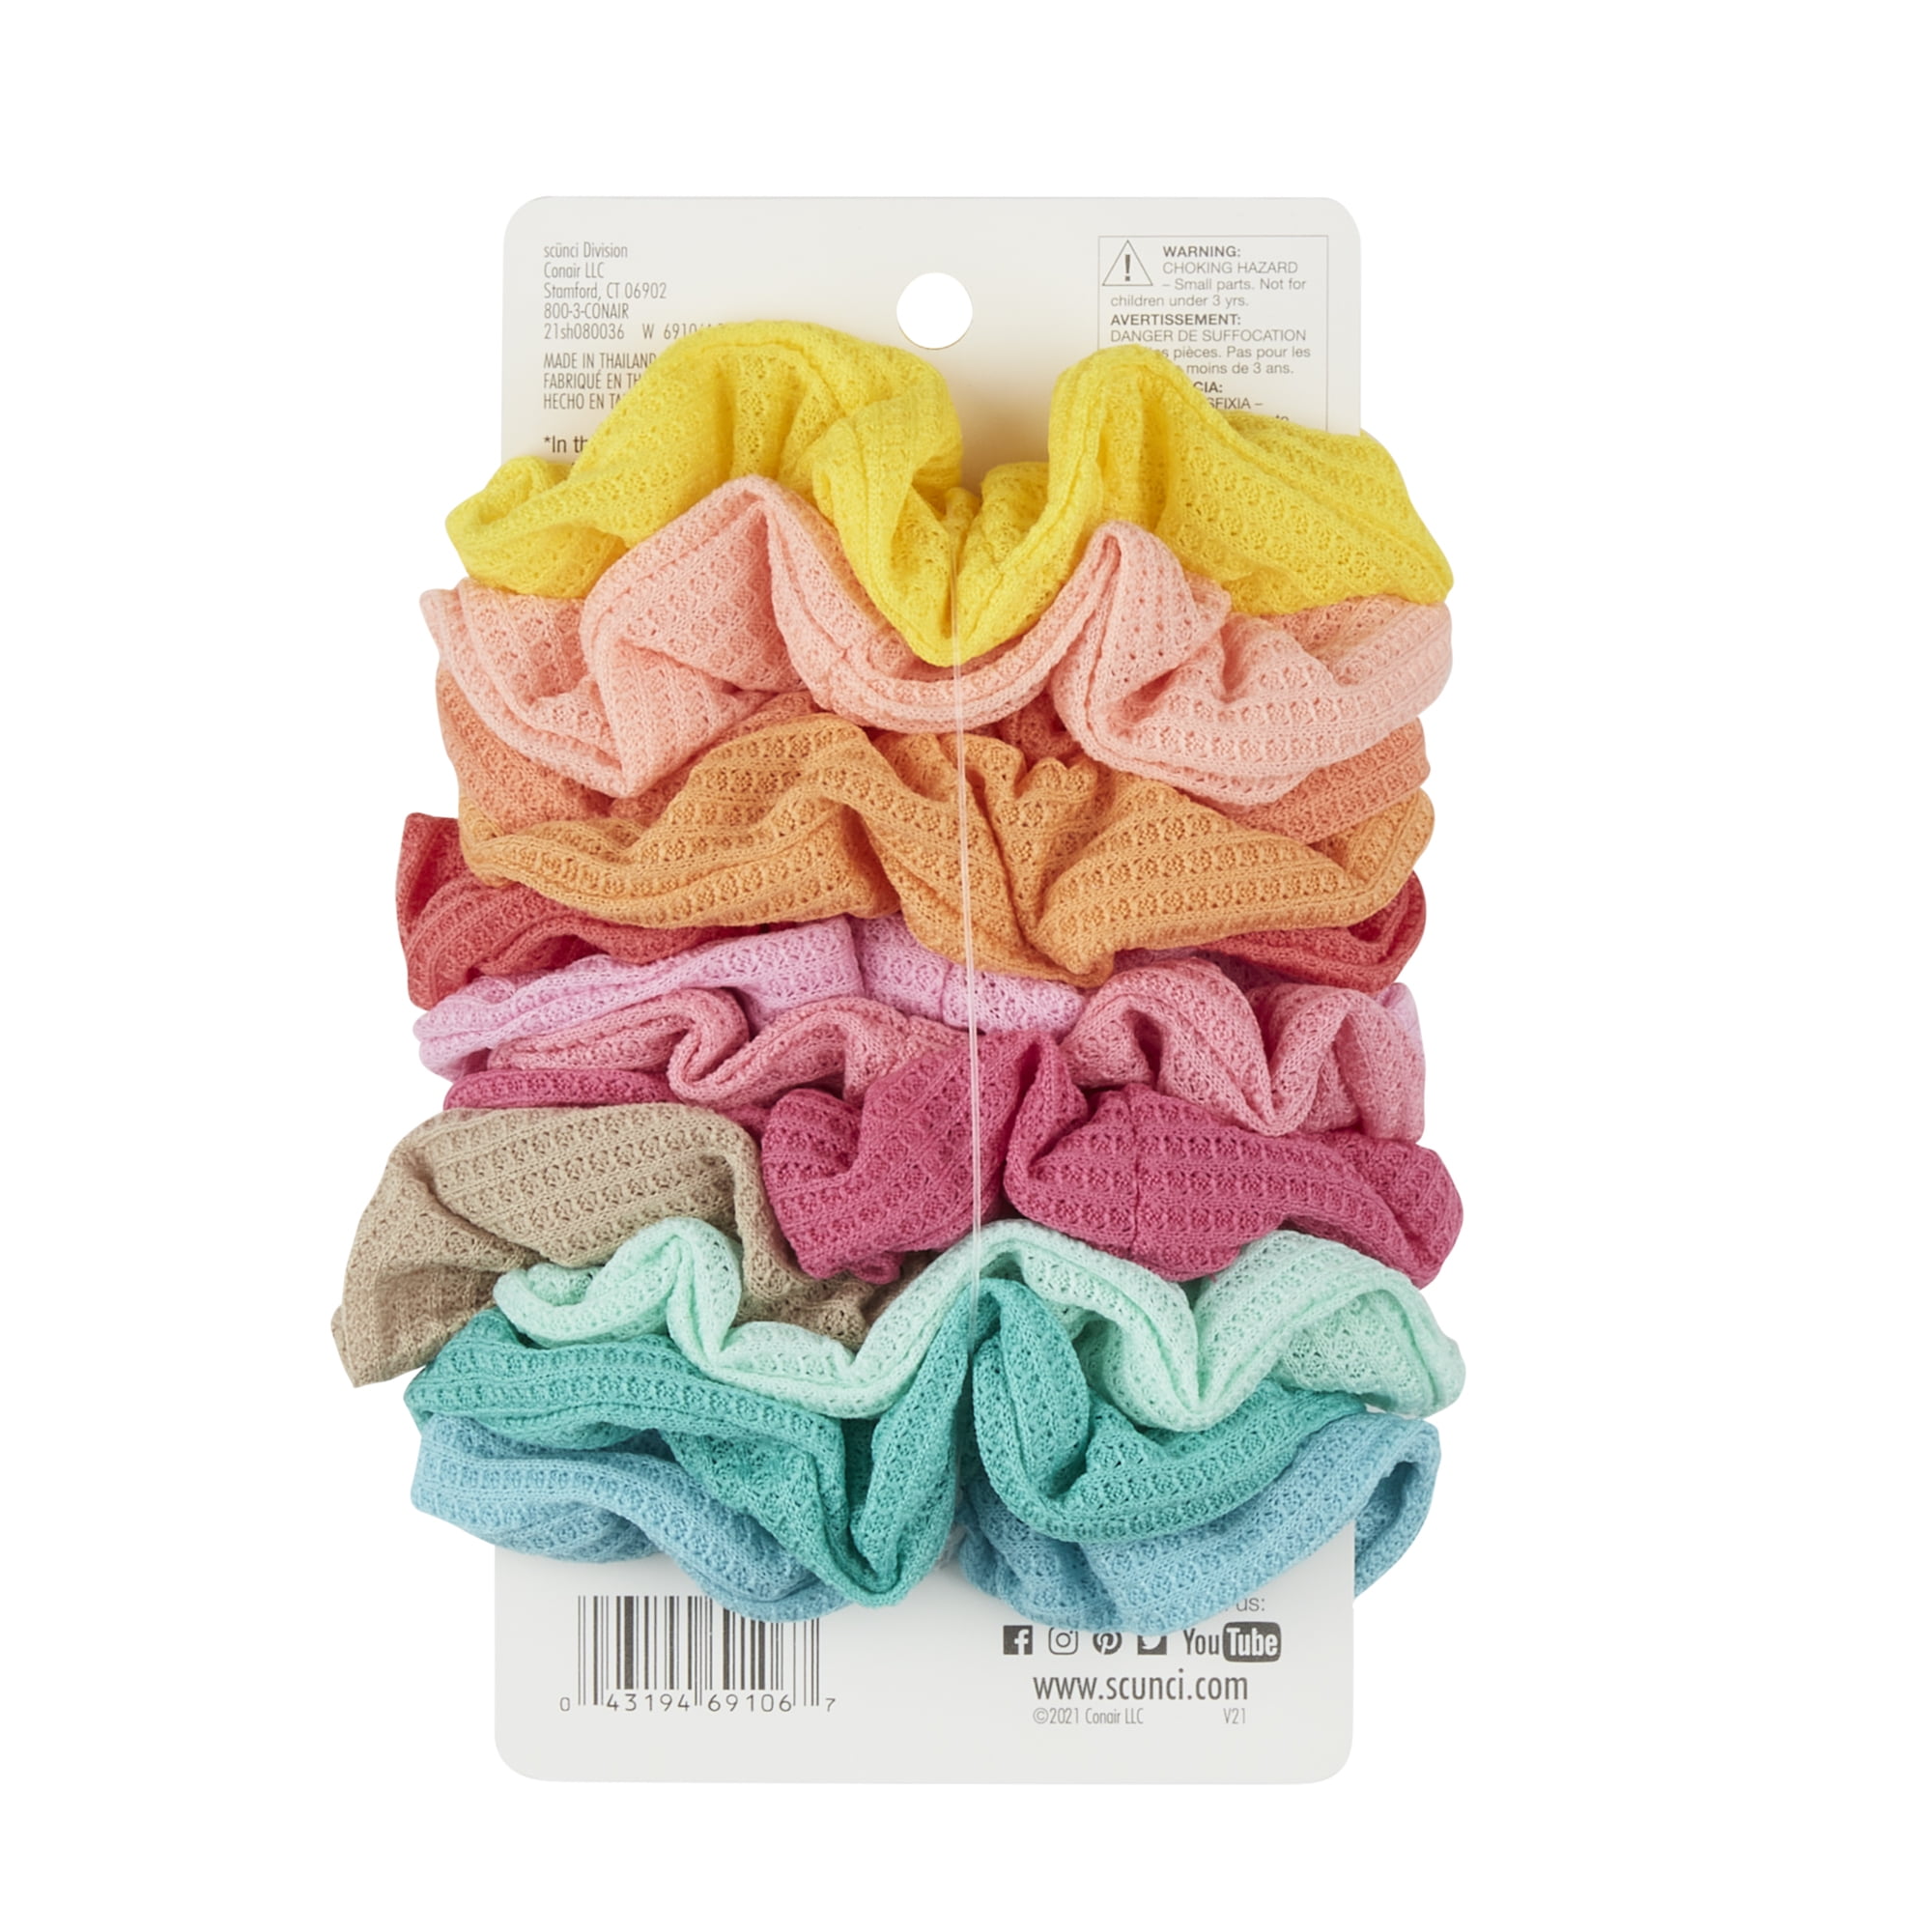 Scunci Value-Pack Scrunchie Hair Ties in Soft Thermals and Knits, Assorted  Colors, 12 Ct